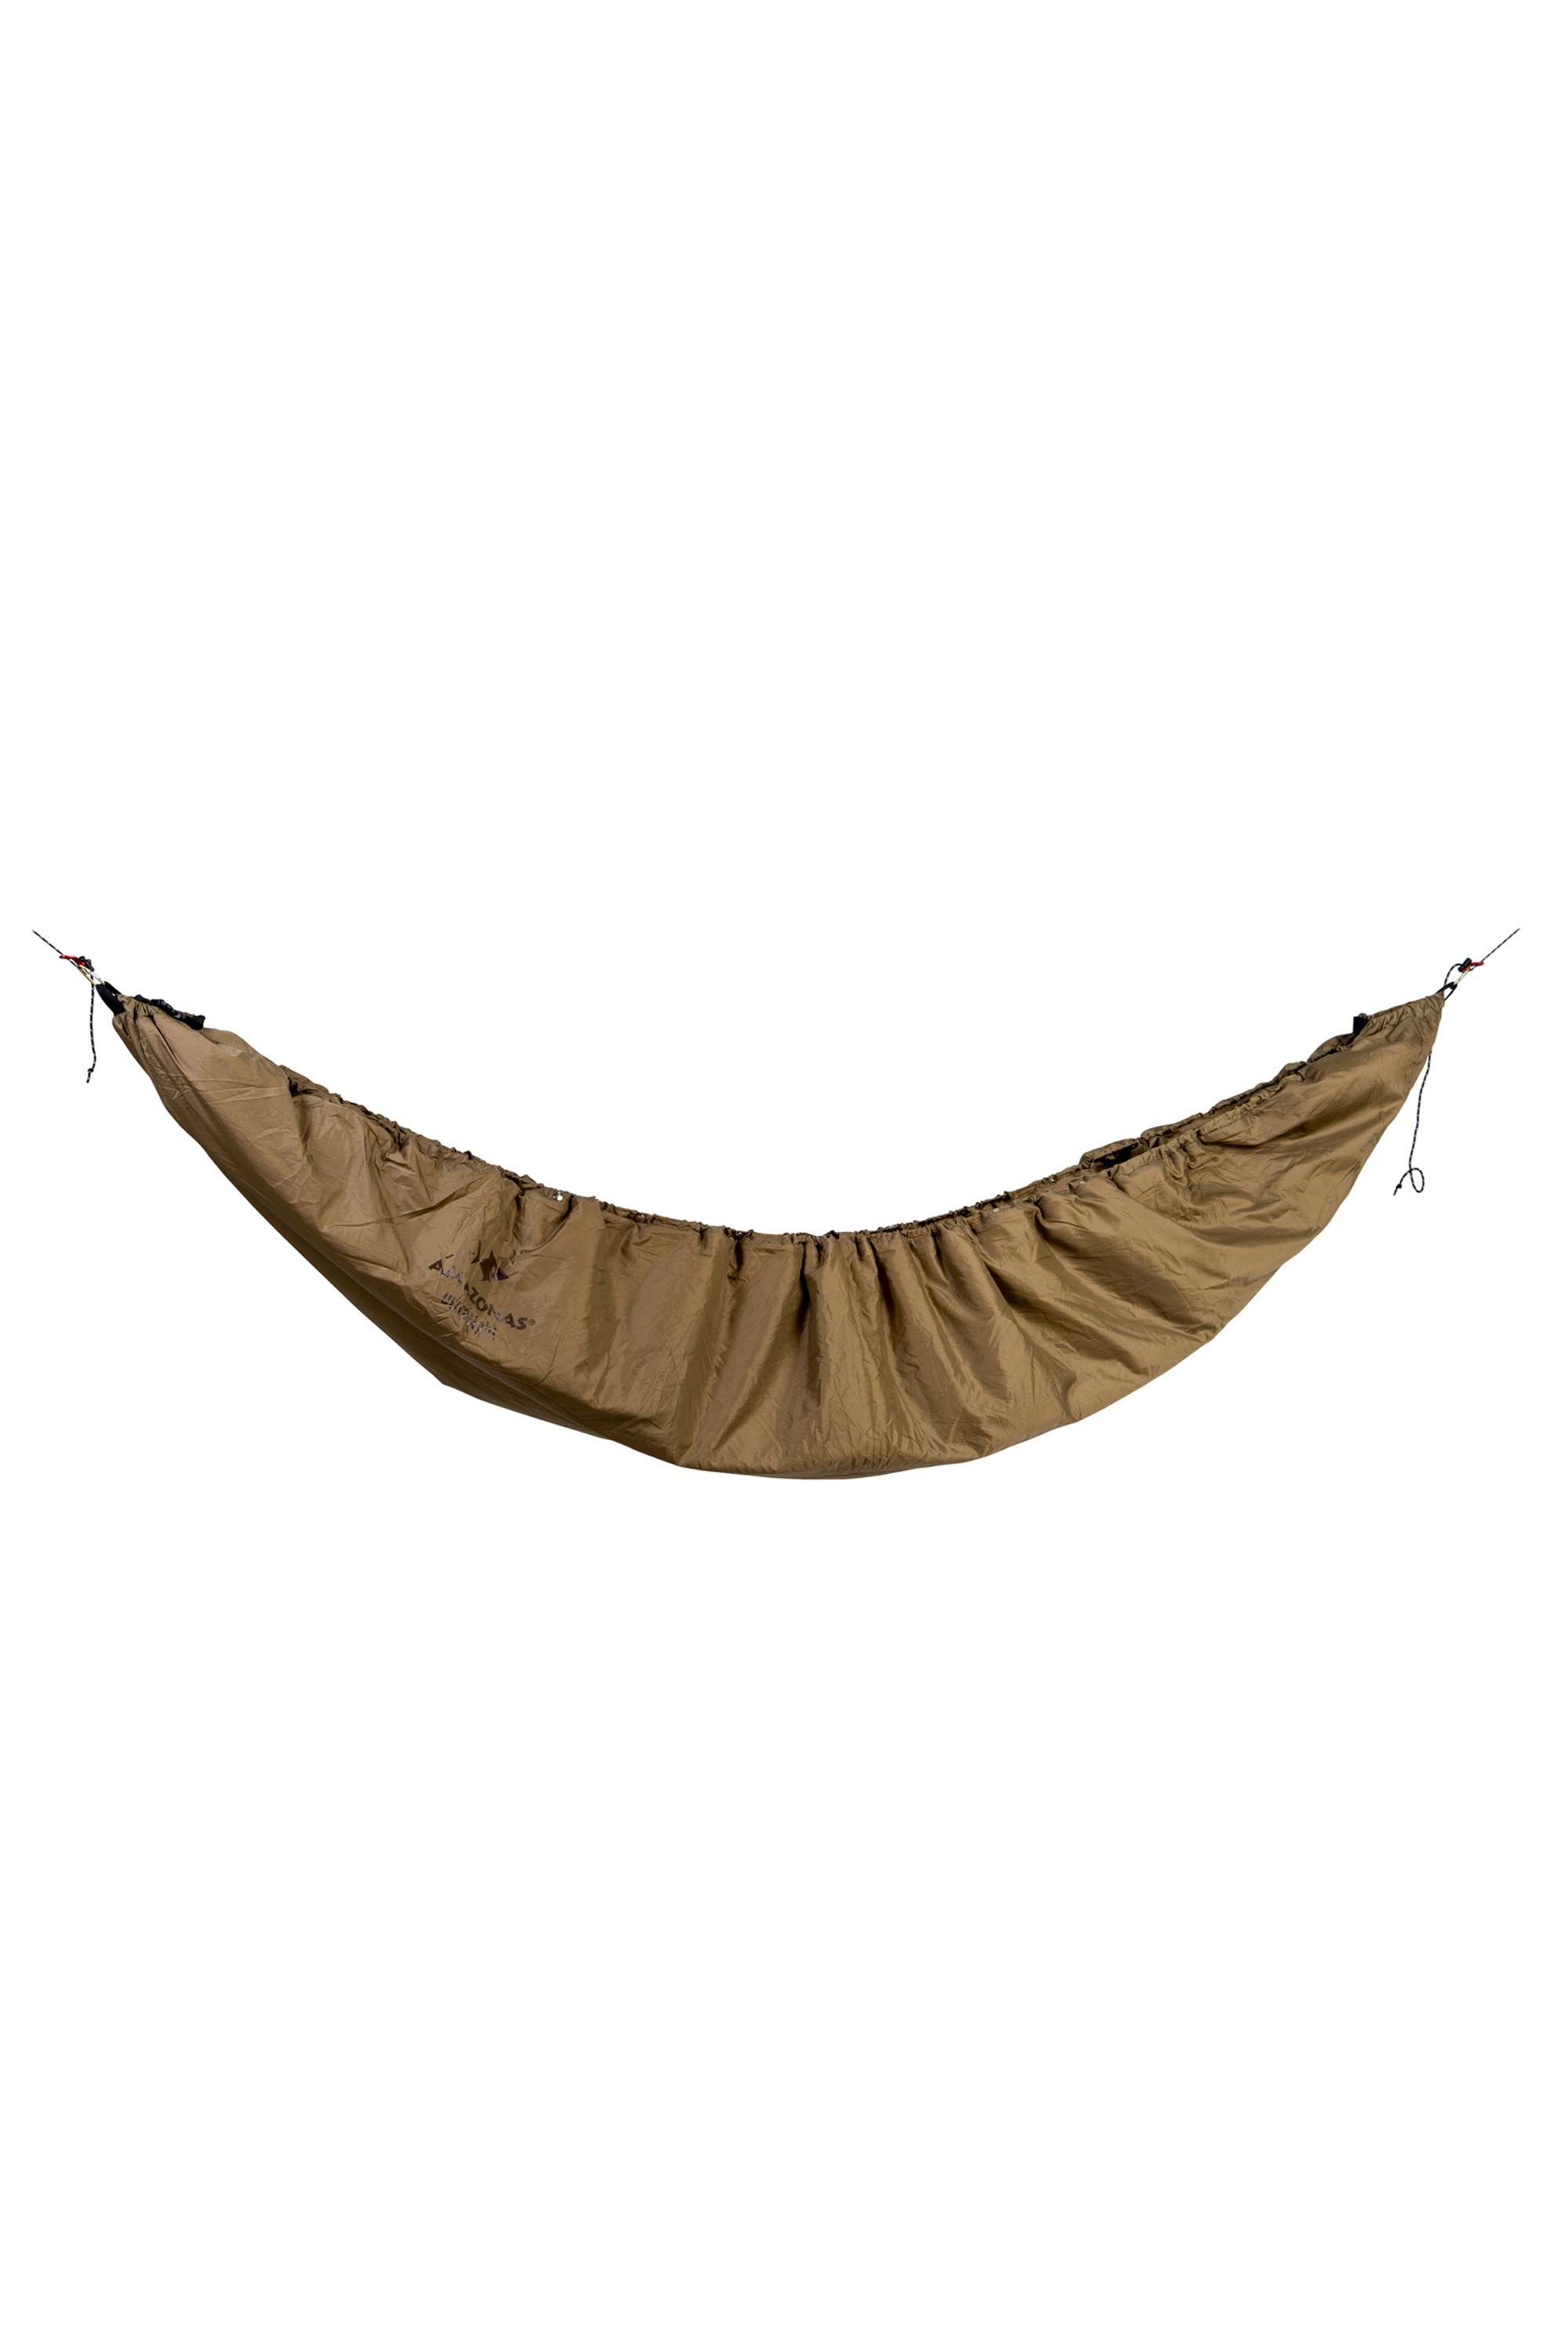 Hammock Underquilt and Poncho 2-in-1 -